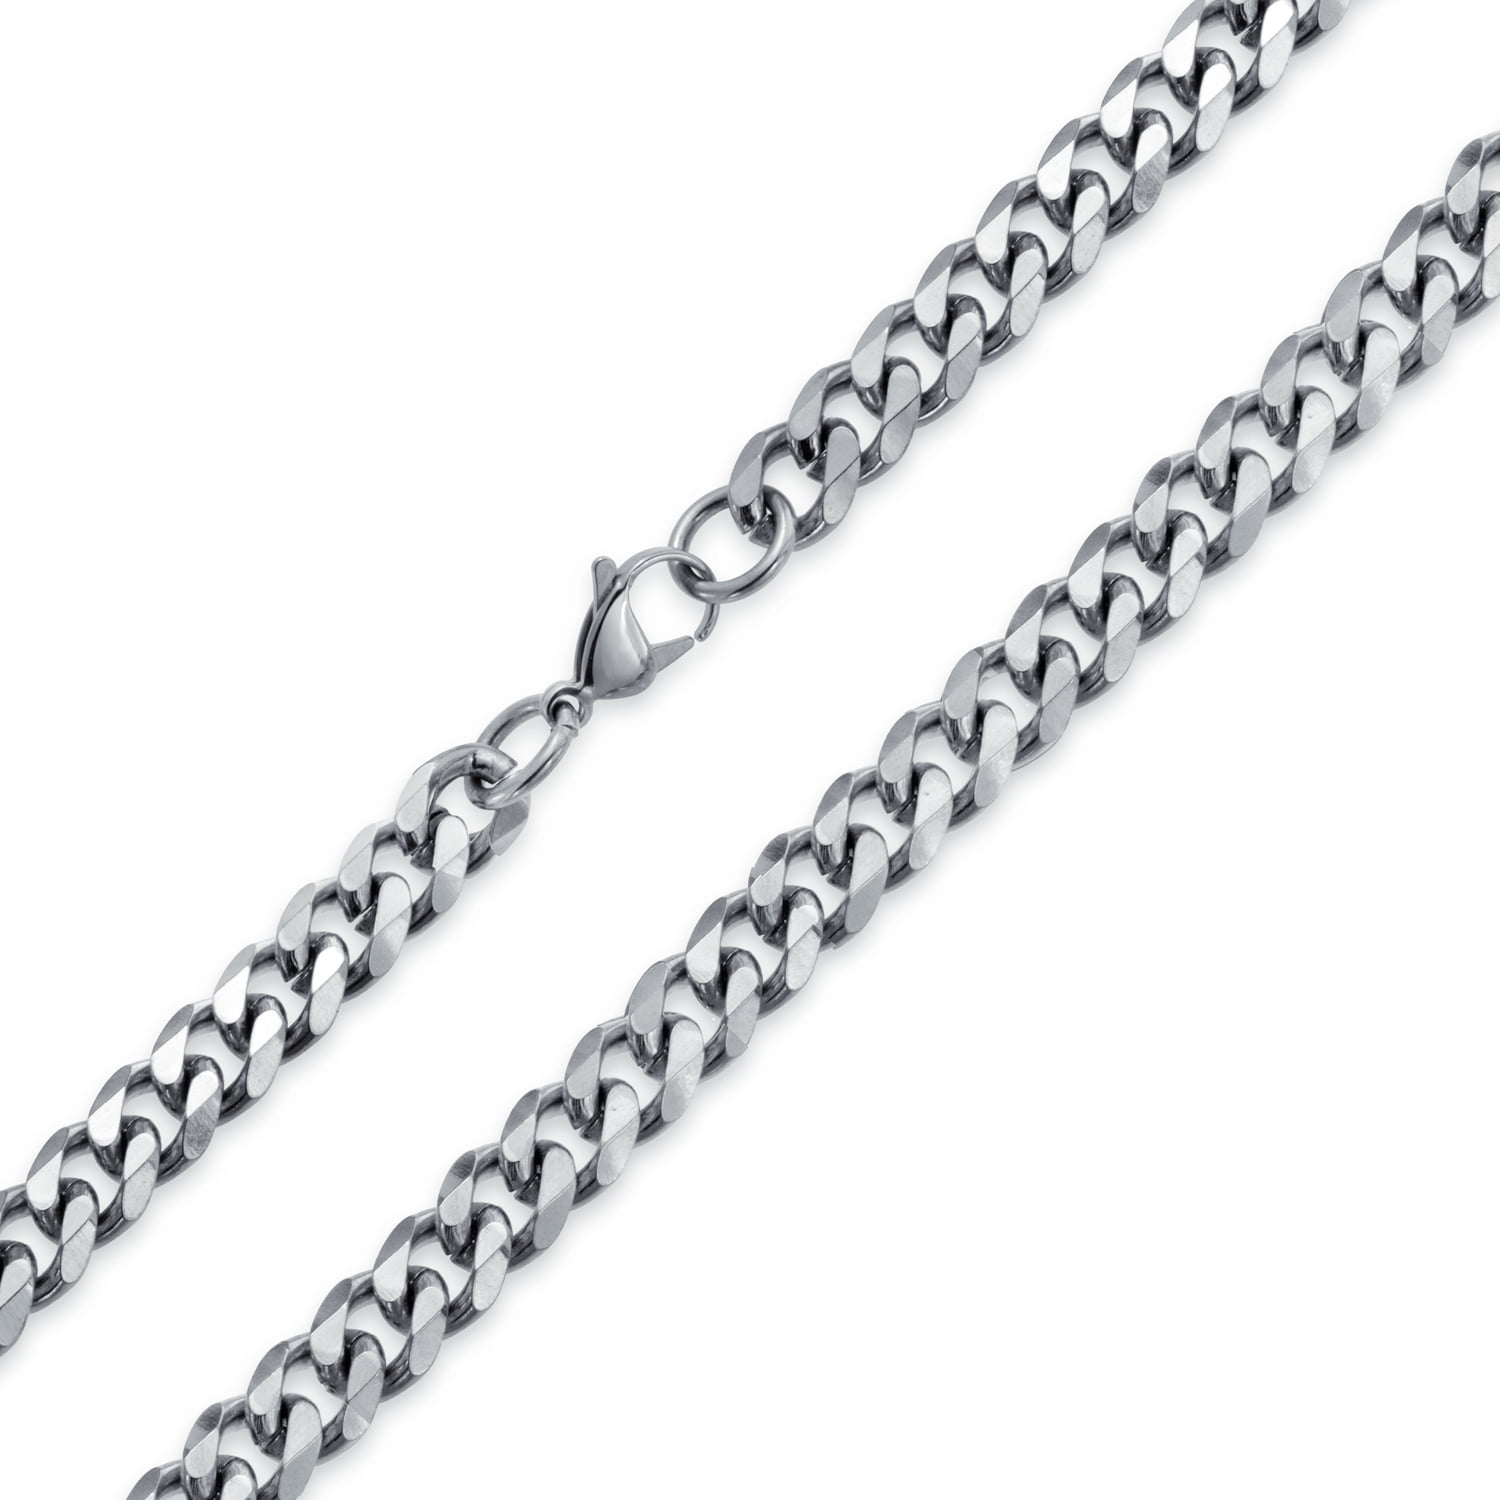 Details about   33"MEN Stainless Steel HEAVY WIDE 10mm Silver Cuban Curb Link Chain Necklace*124 